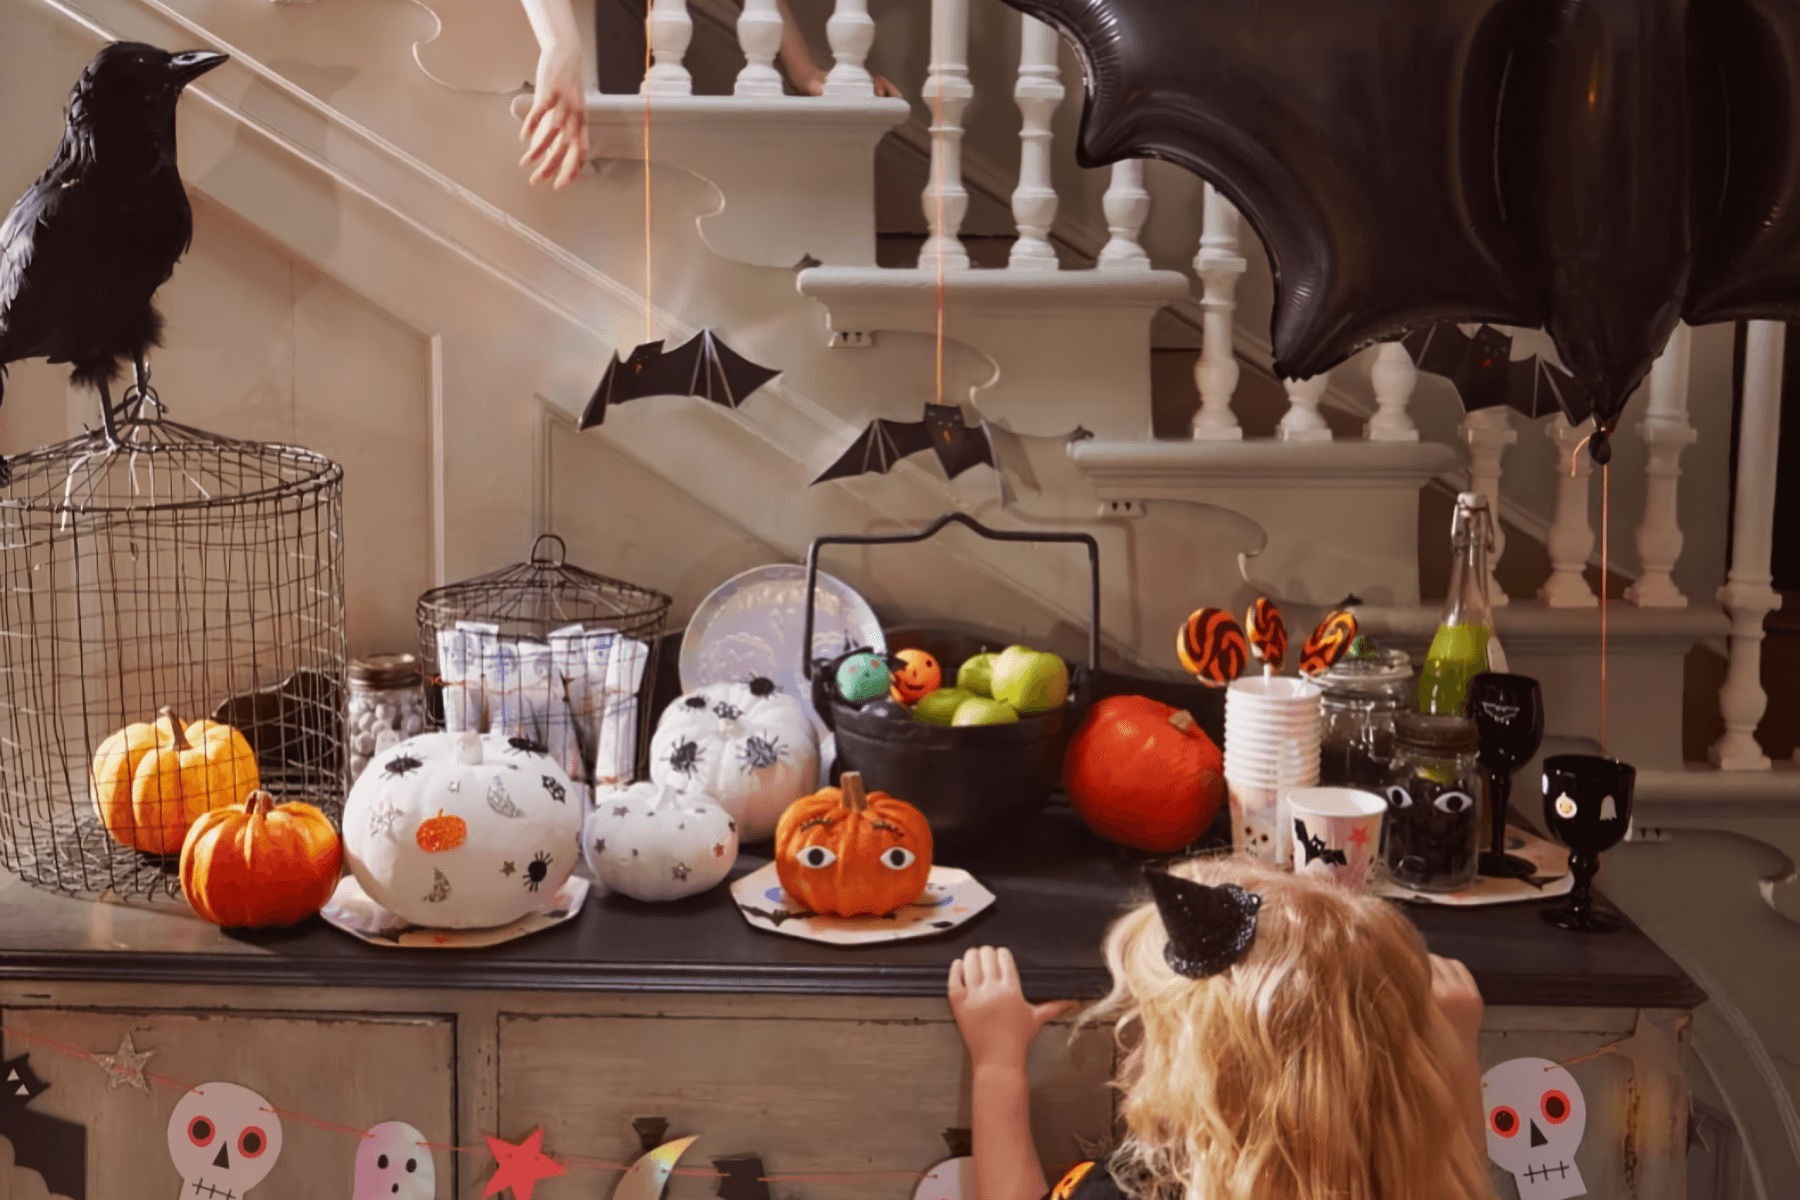 A young child wearing a small witch hat peers at a buffet table with decorated pumpkins and Halloween treats and décor in front of a white staircase.